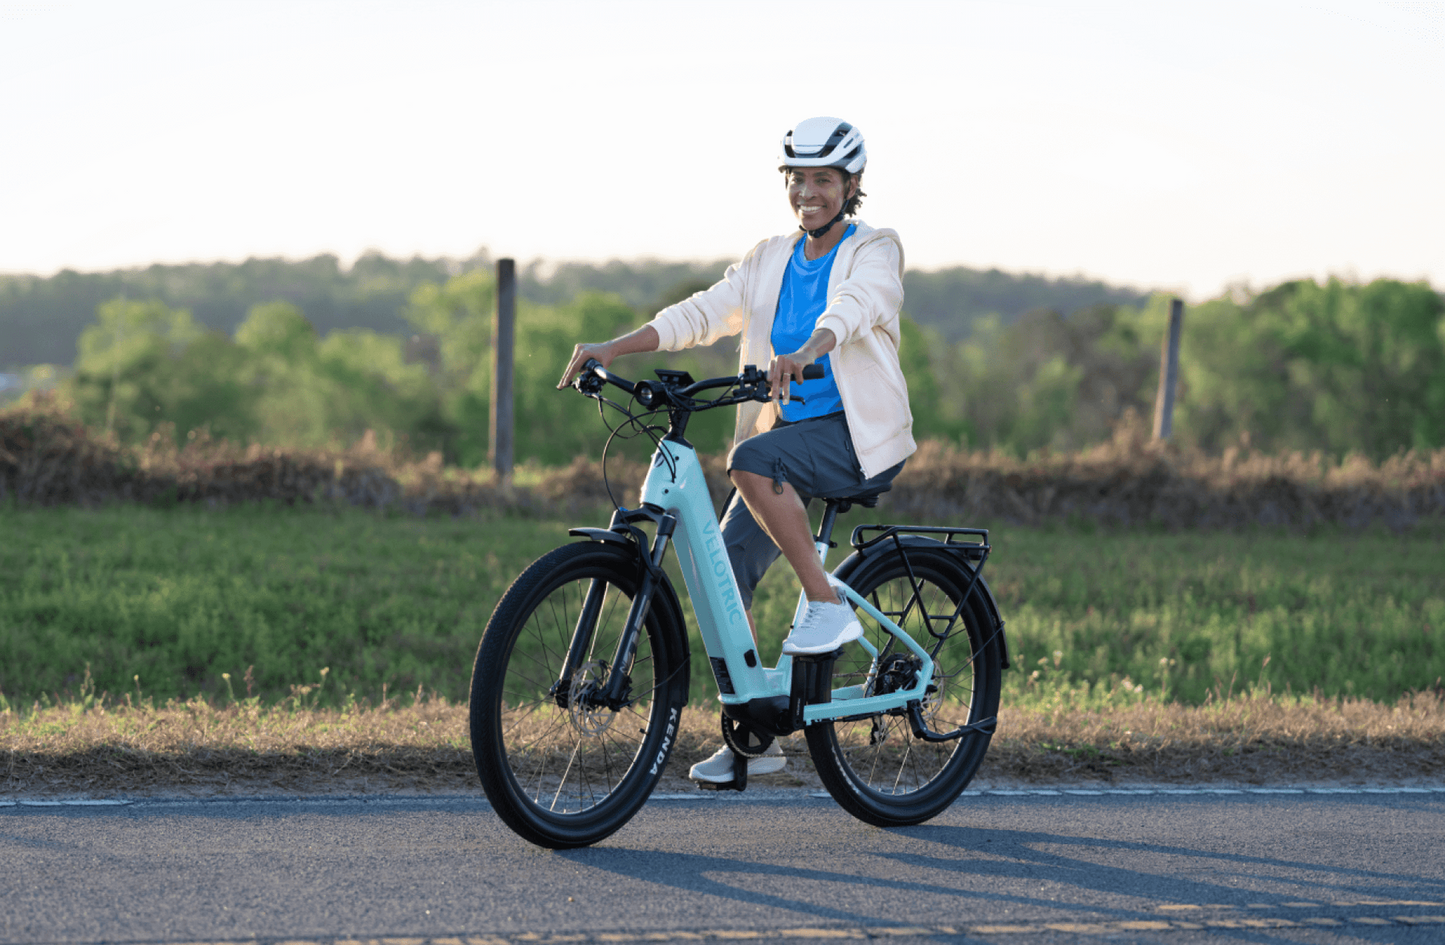 A person riding a Velotric Discover 2 Electric Bike on a paved road with fields in the background during daytime.